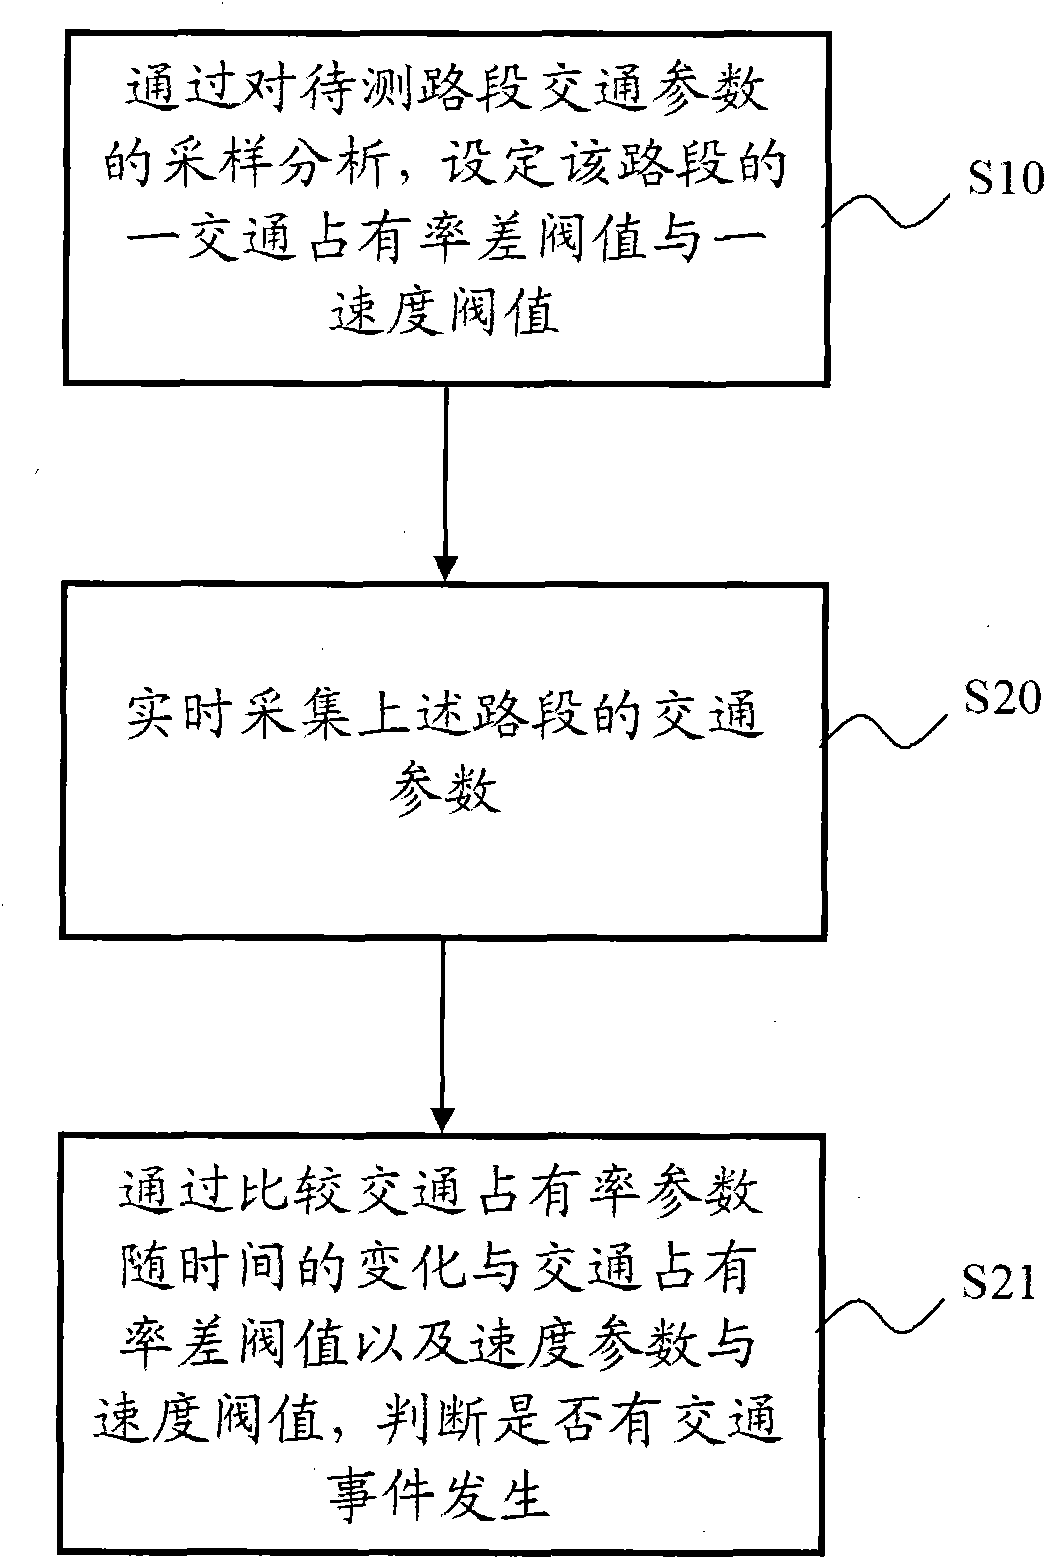 Method and system for detecting road traffic incidents